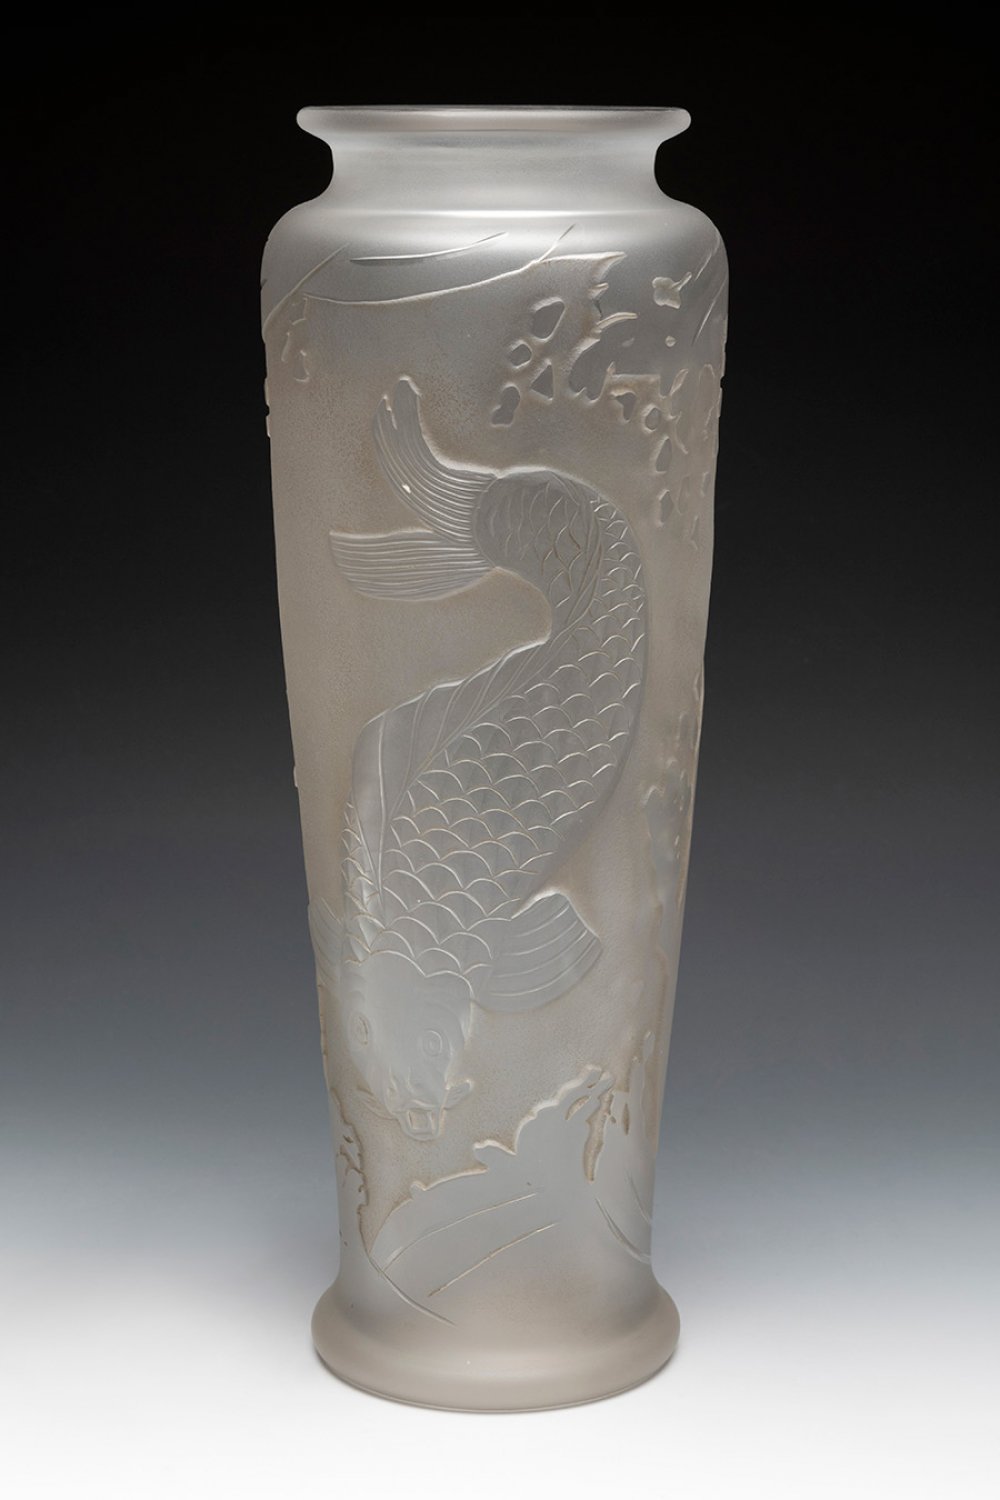 Art Nouveau vase. BACCARAT, ca.1900.Carved glass.Signed "Baccarat" on the base.Procedure: Private - Image 2 of 5